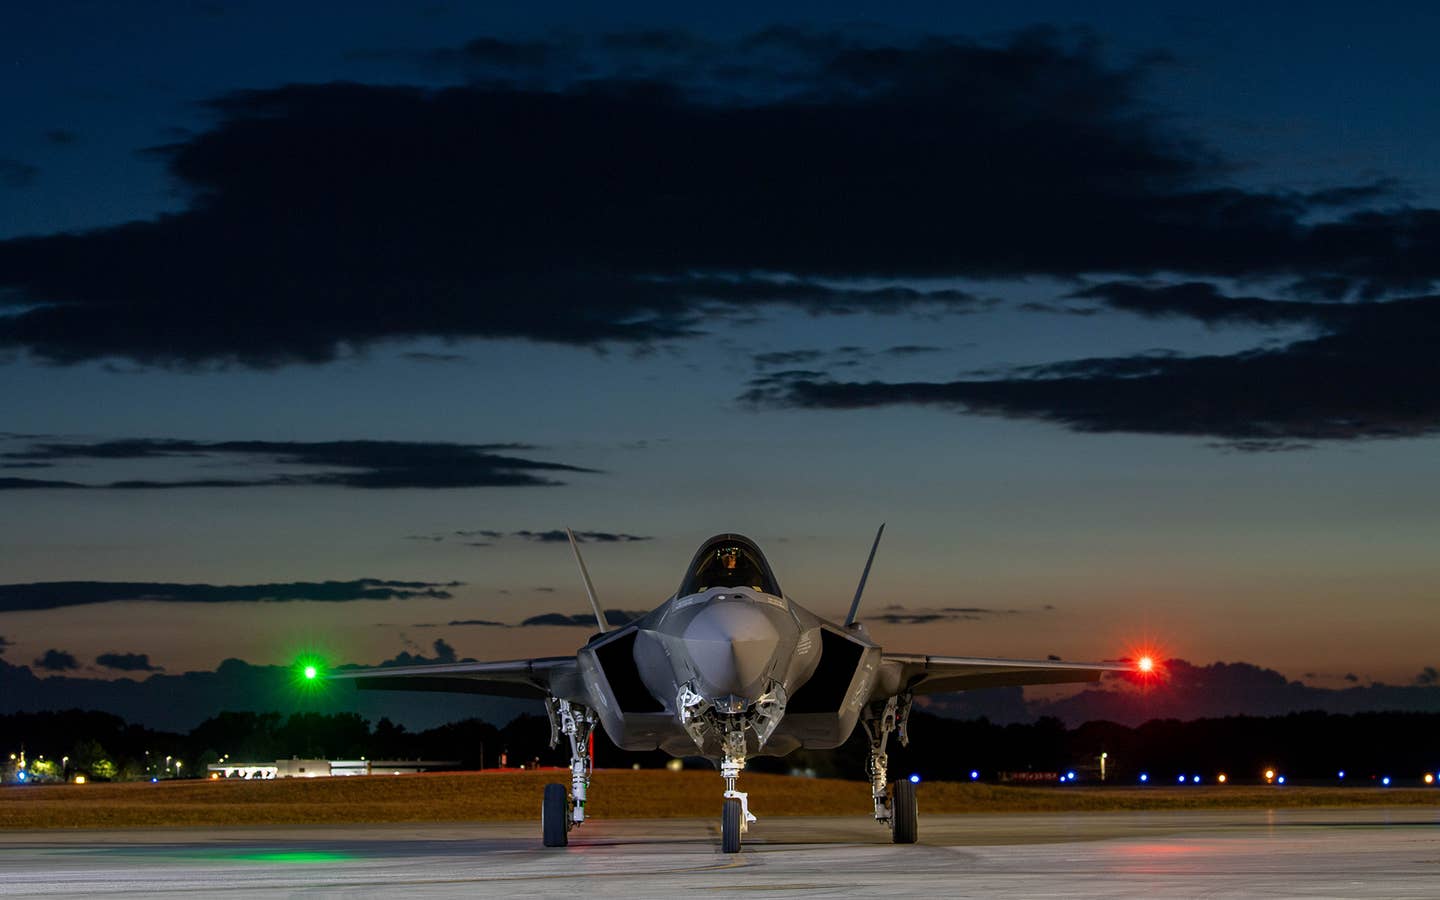 An F-35A Lightning II pilot assigned to the 134th Fighter Squadron, Vermont Air National Guard, prepares for launch during routine flying operations at the Vermont Air National Guard base, South Burlington, Vermont, Sept. 23, 2020. <em>Credit: A1C Jana Somero/U.S. Air Force</em>